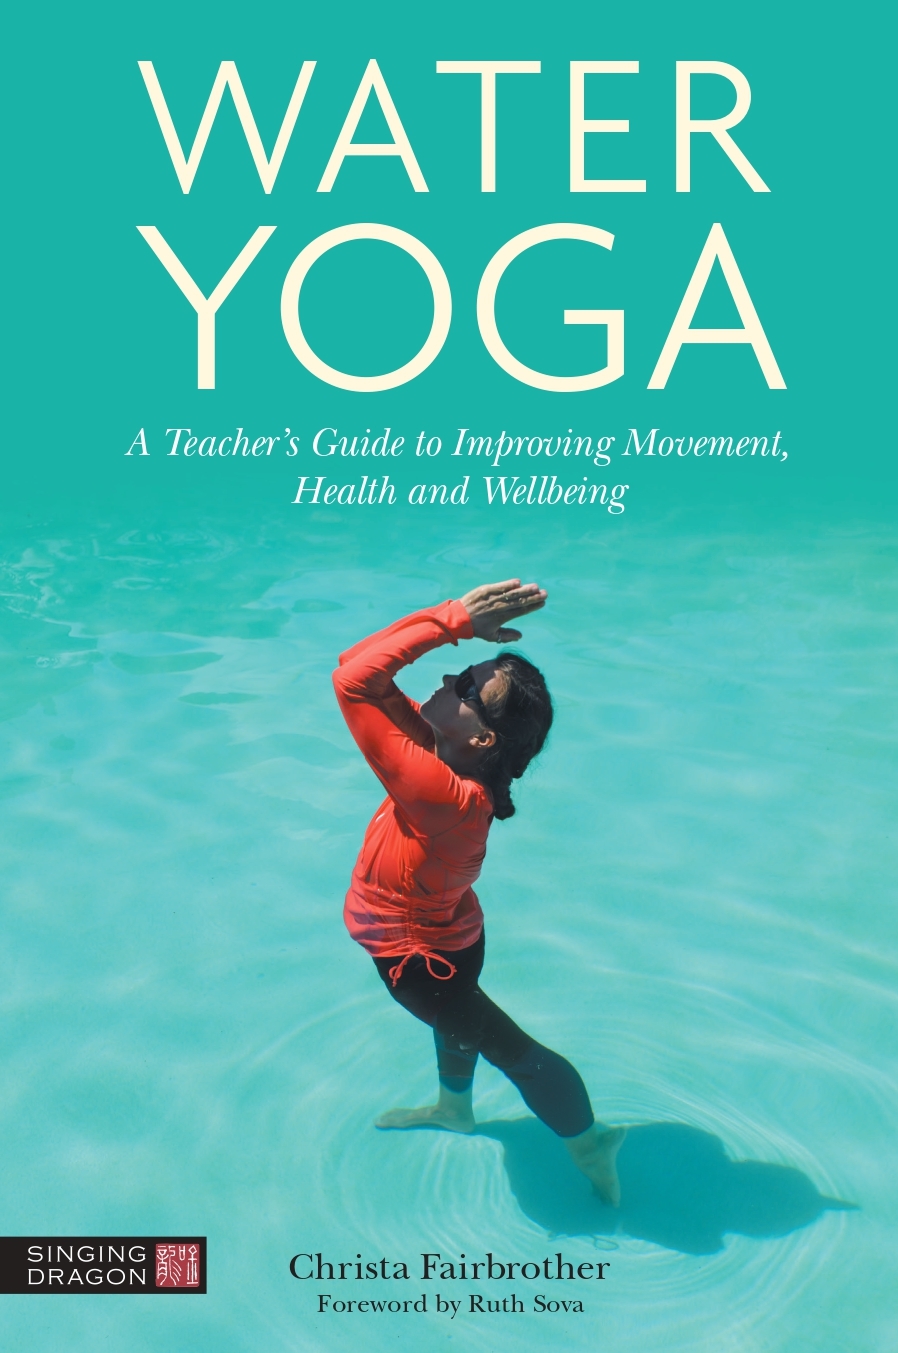 Dream = Book. Christa published her Water Yoga book!